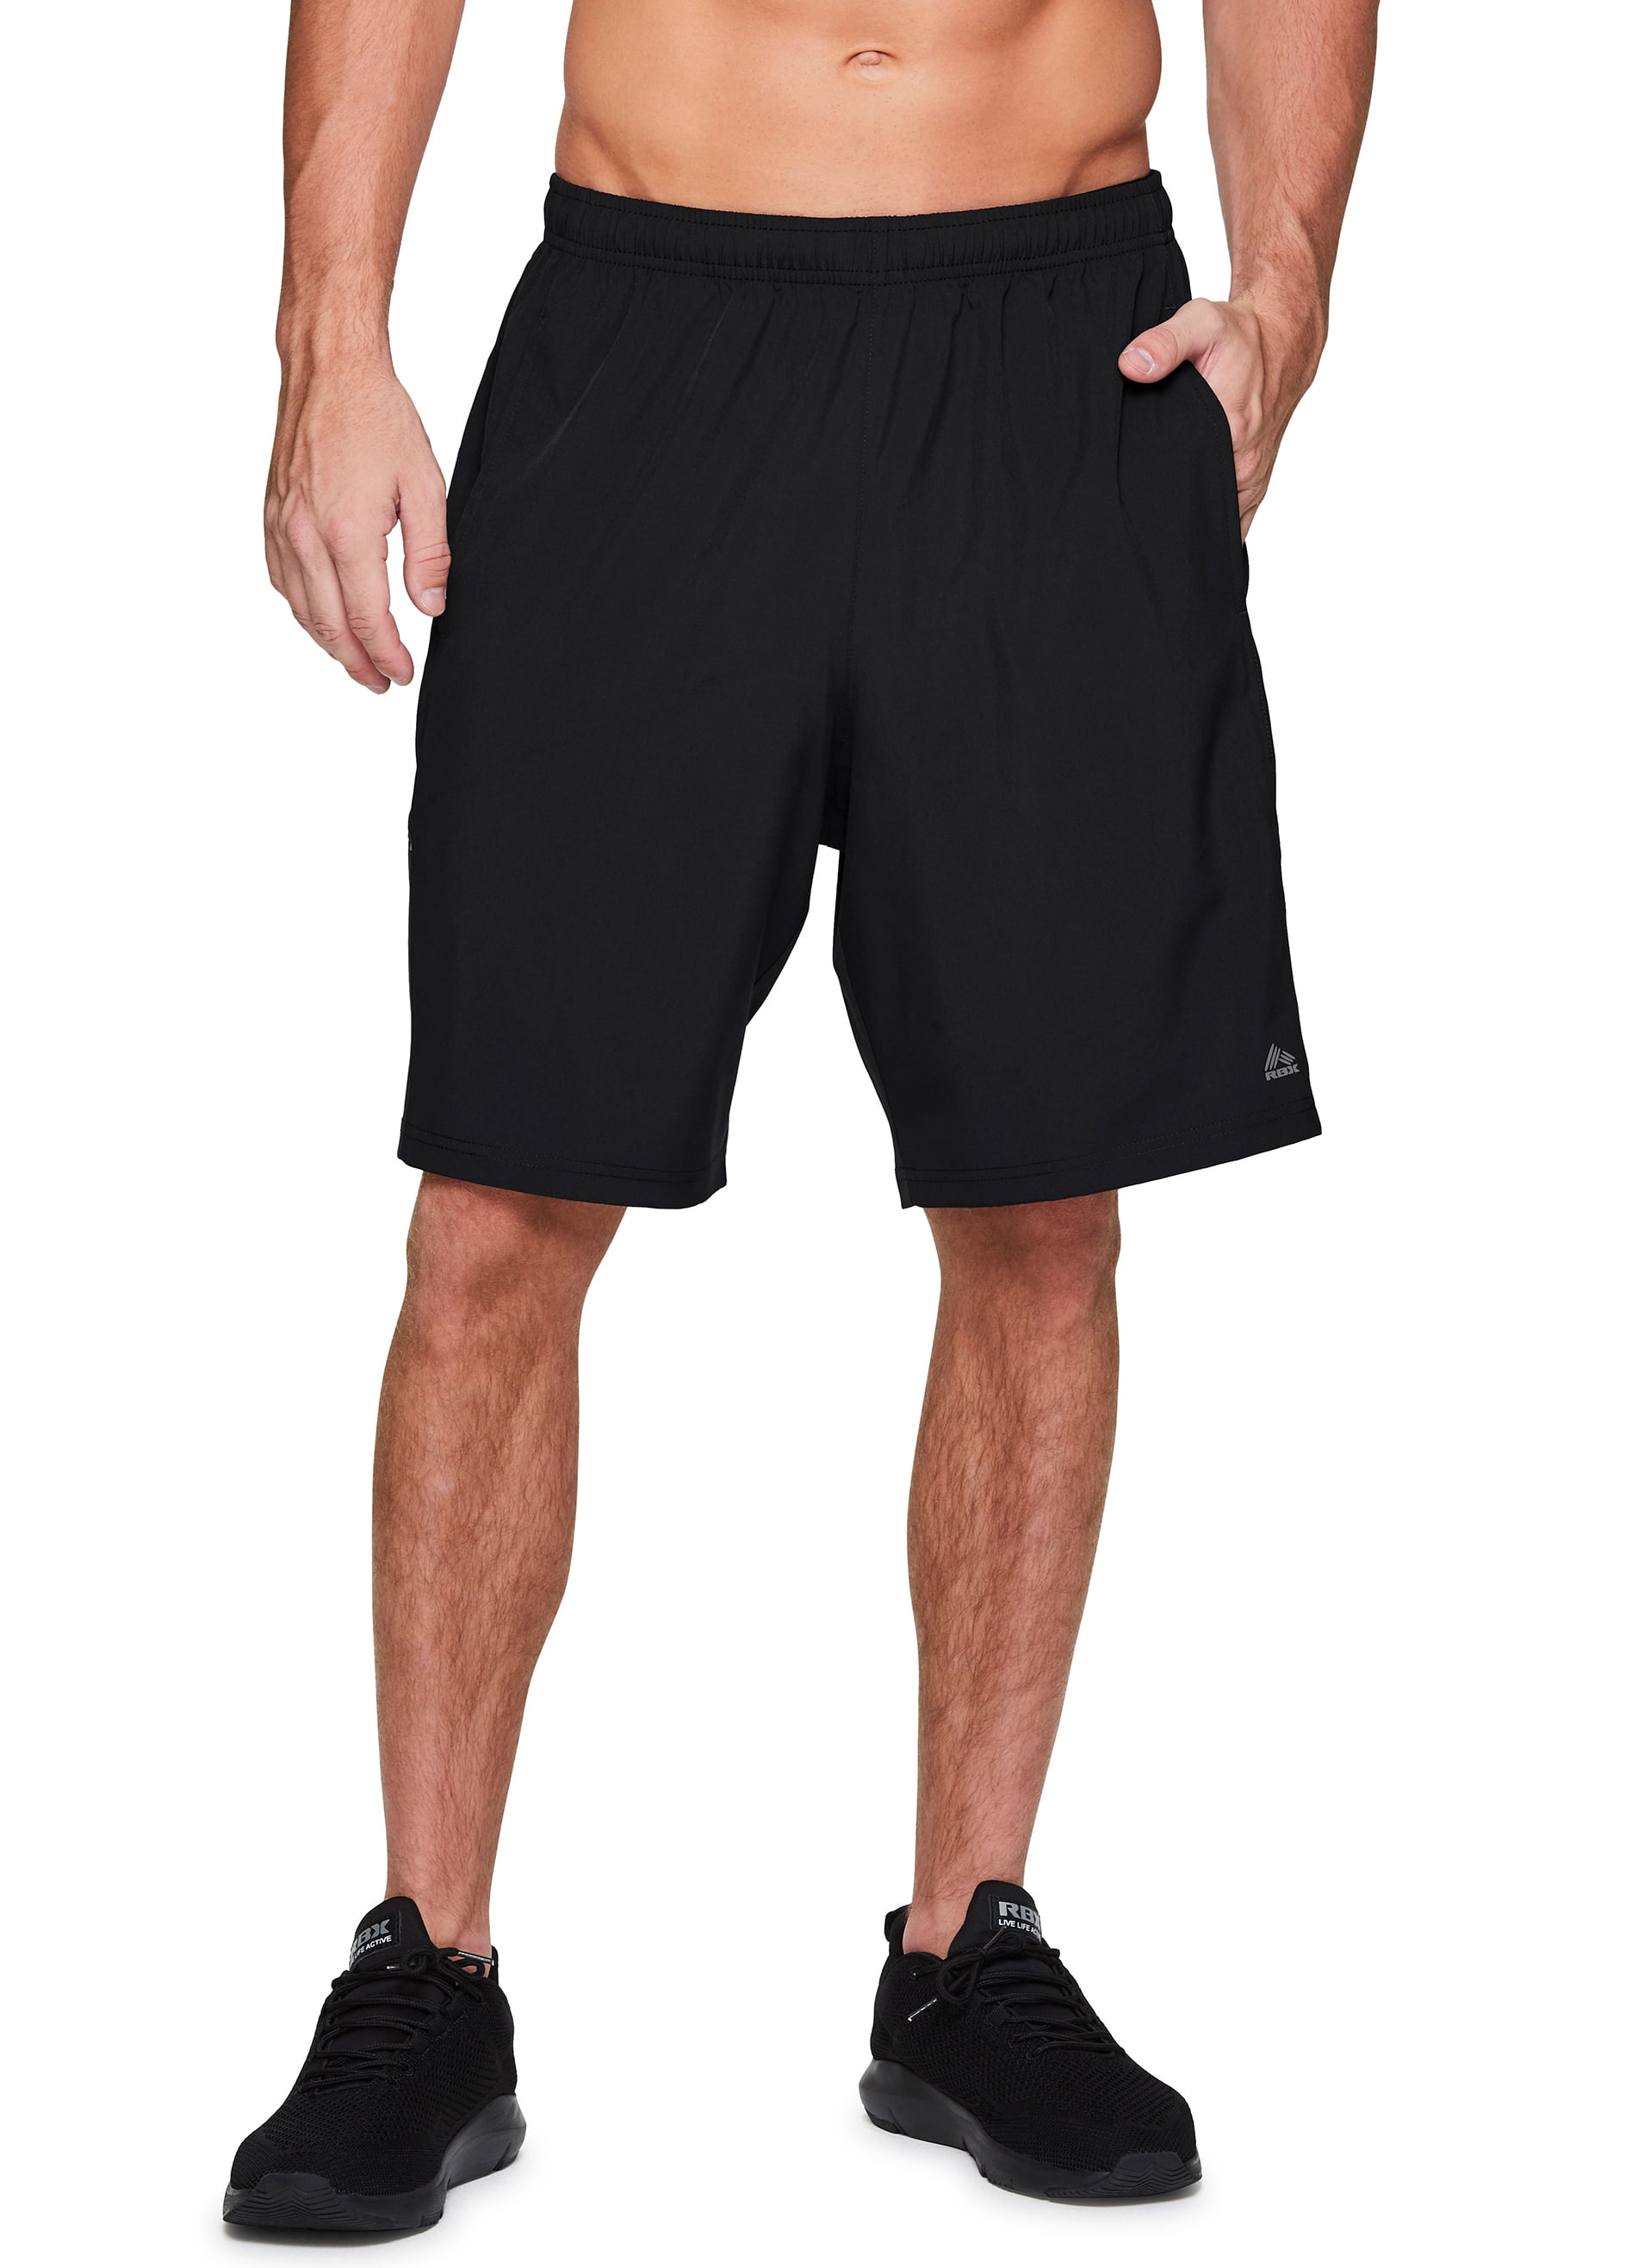 RBX Active Men's Colorblock Quick Dry Woven Basketball Gym Shorts